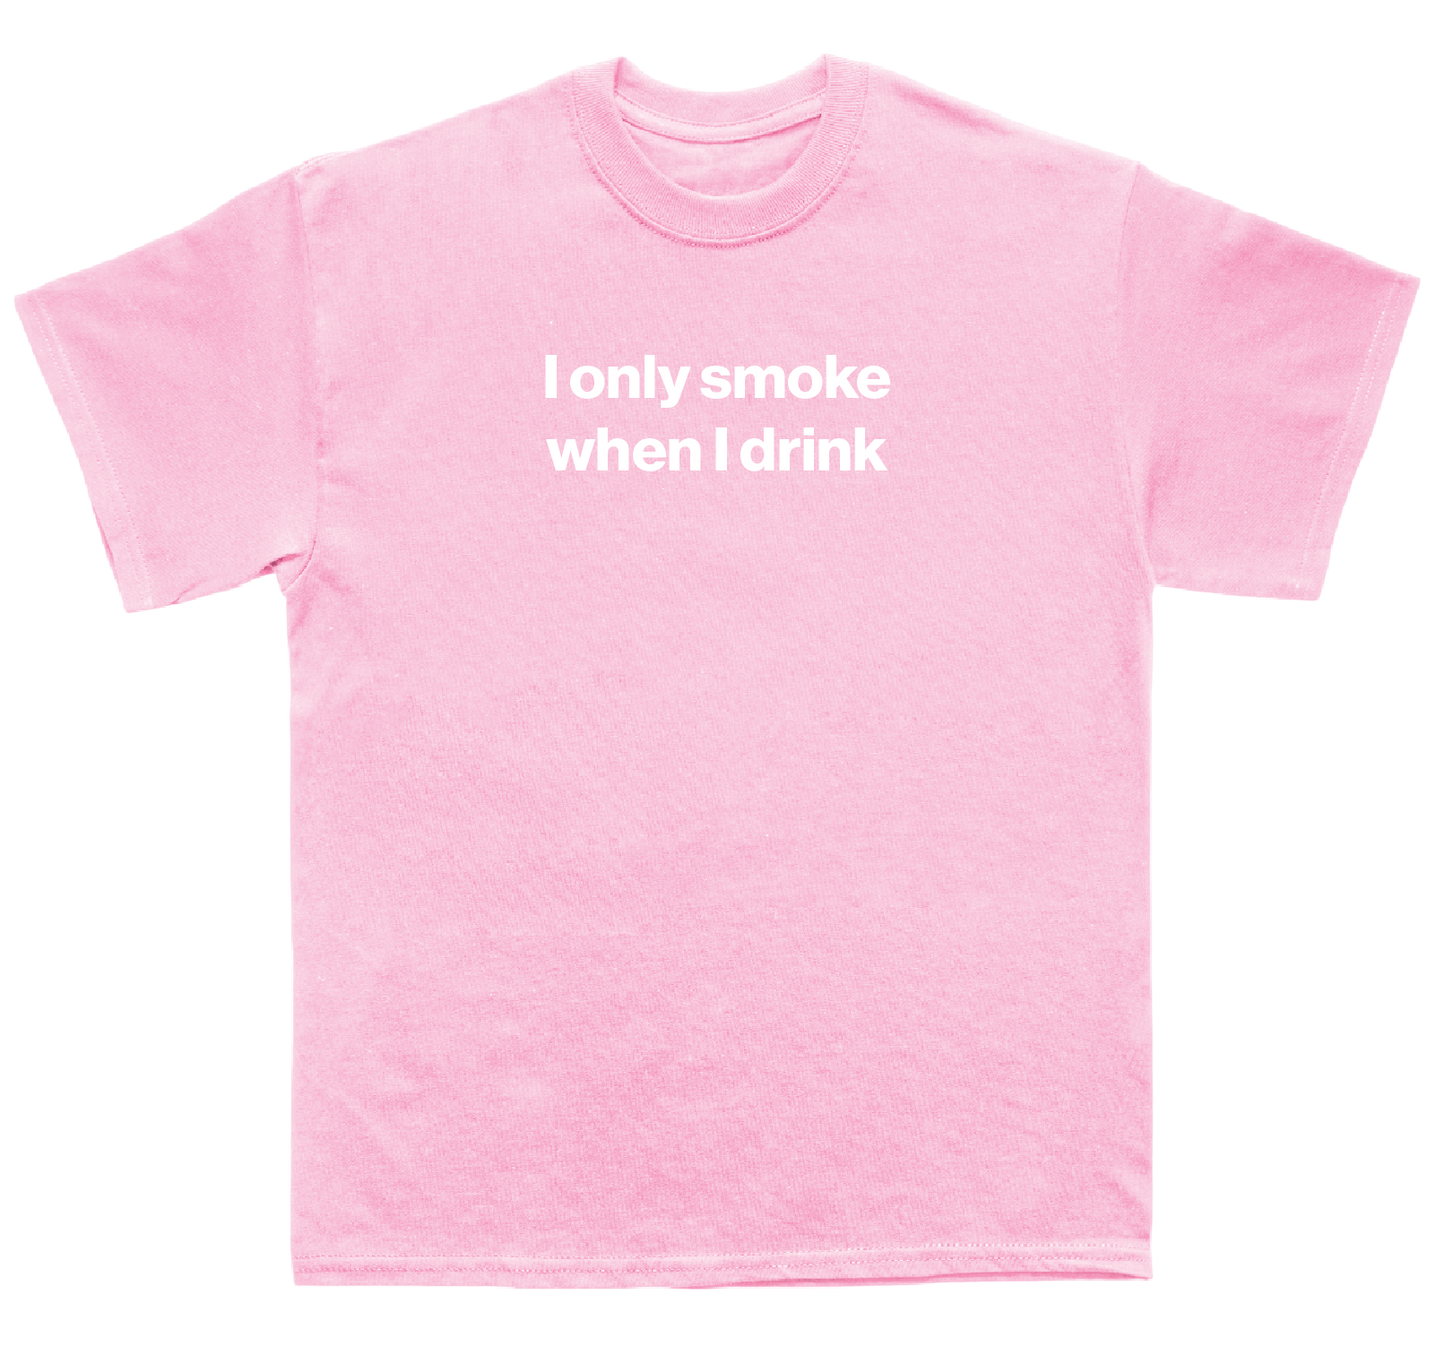 I only smoke when I drink shirt